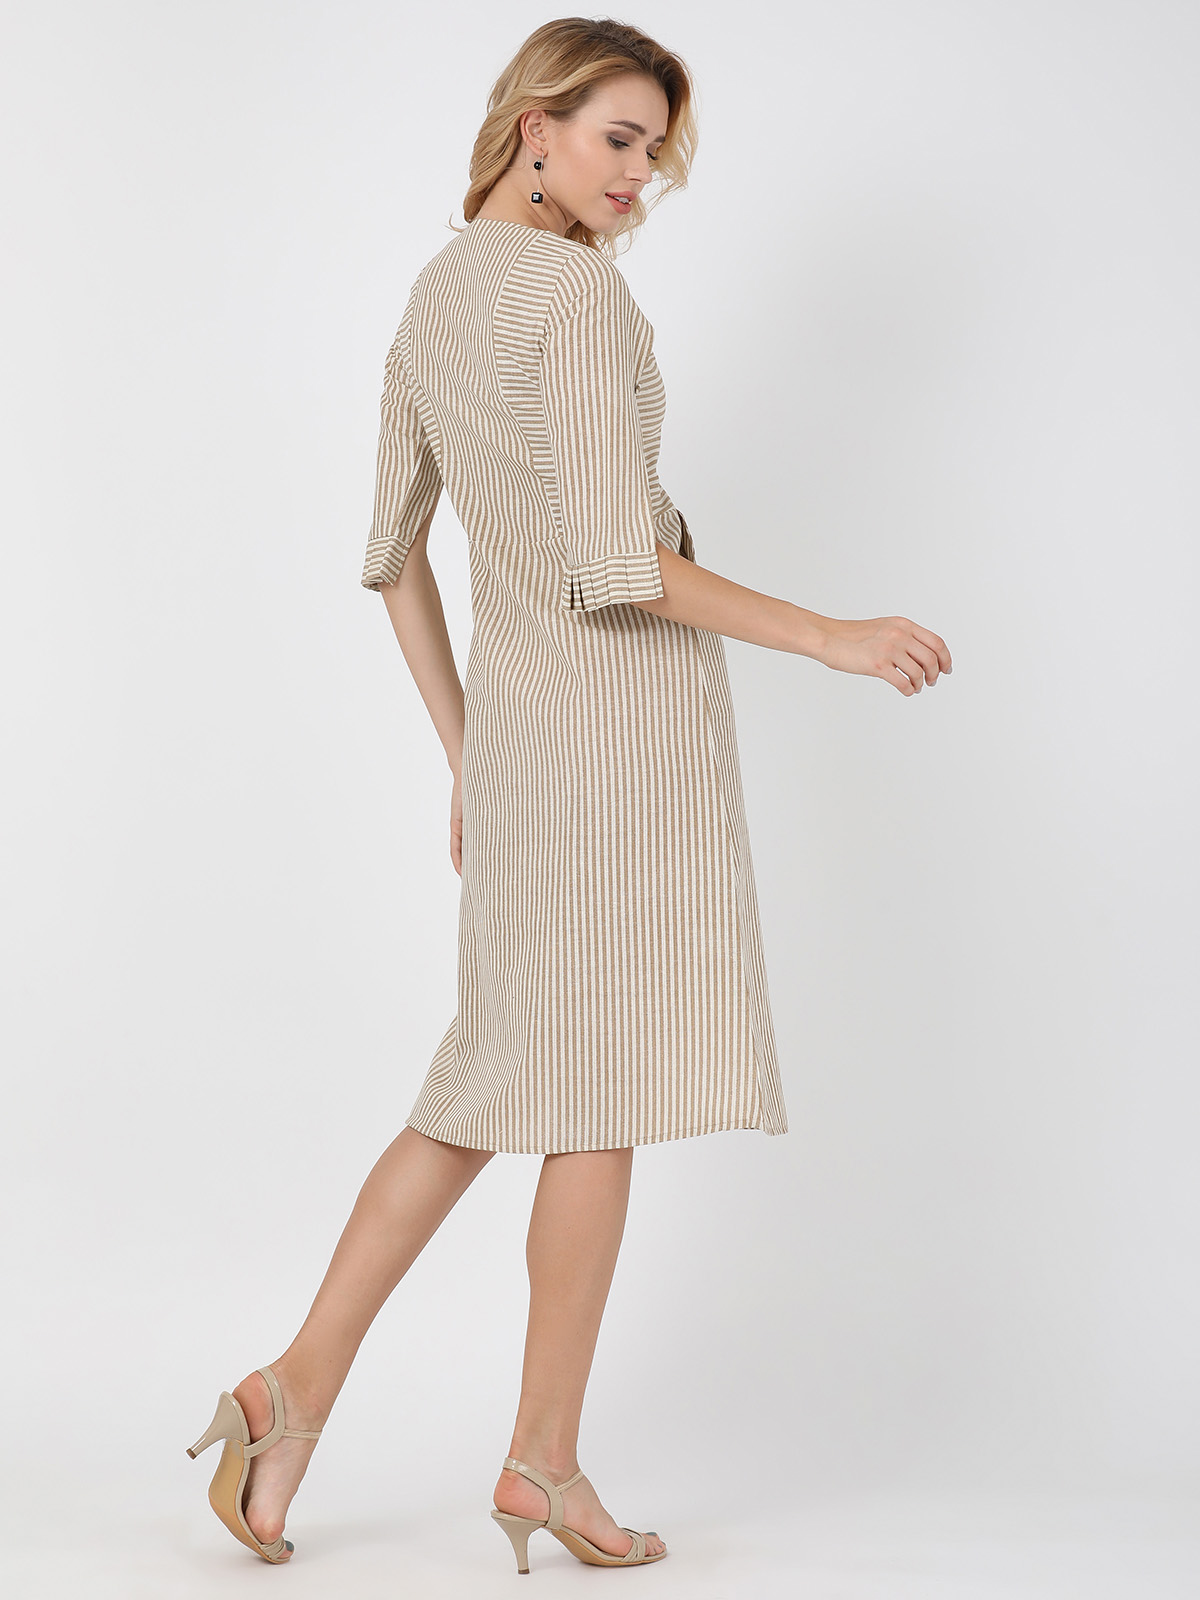 Smartly Cotton Linen 3/4th Open Sleeve One Piece Dress